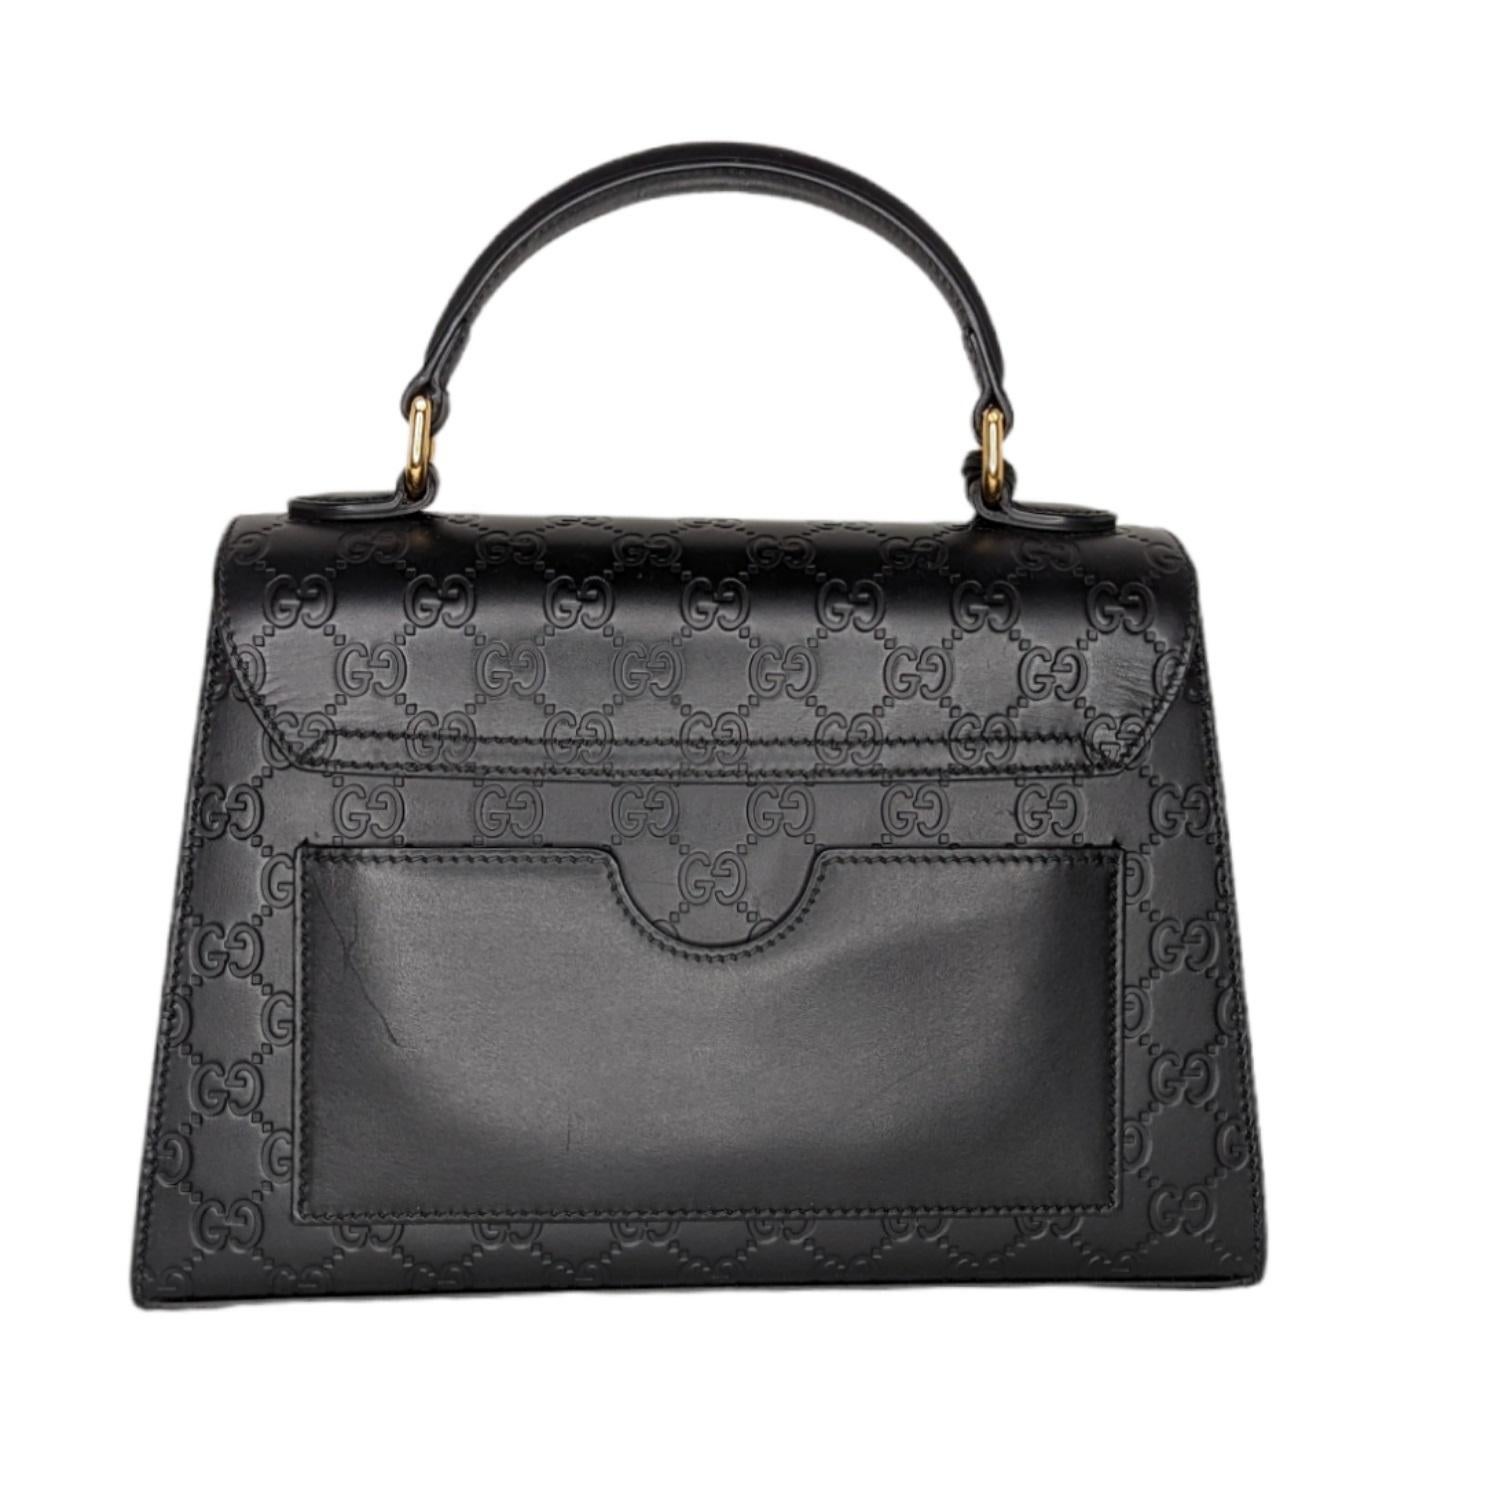 This stunning Gucci was created in a new shape for the Padlock collection and is a perfect size! The bag features gorgeous signature embossed GG leather with stunning gold-tone hardware, a top handle and detachable shoulder strap. The interior is